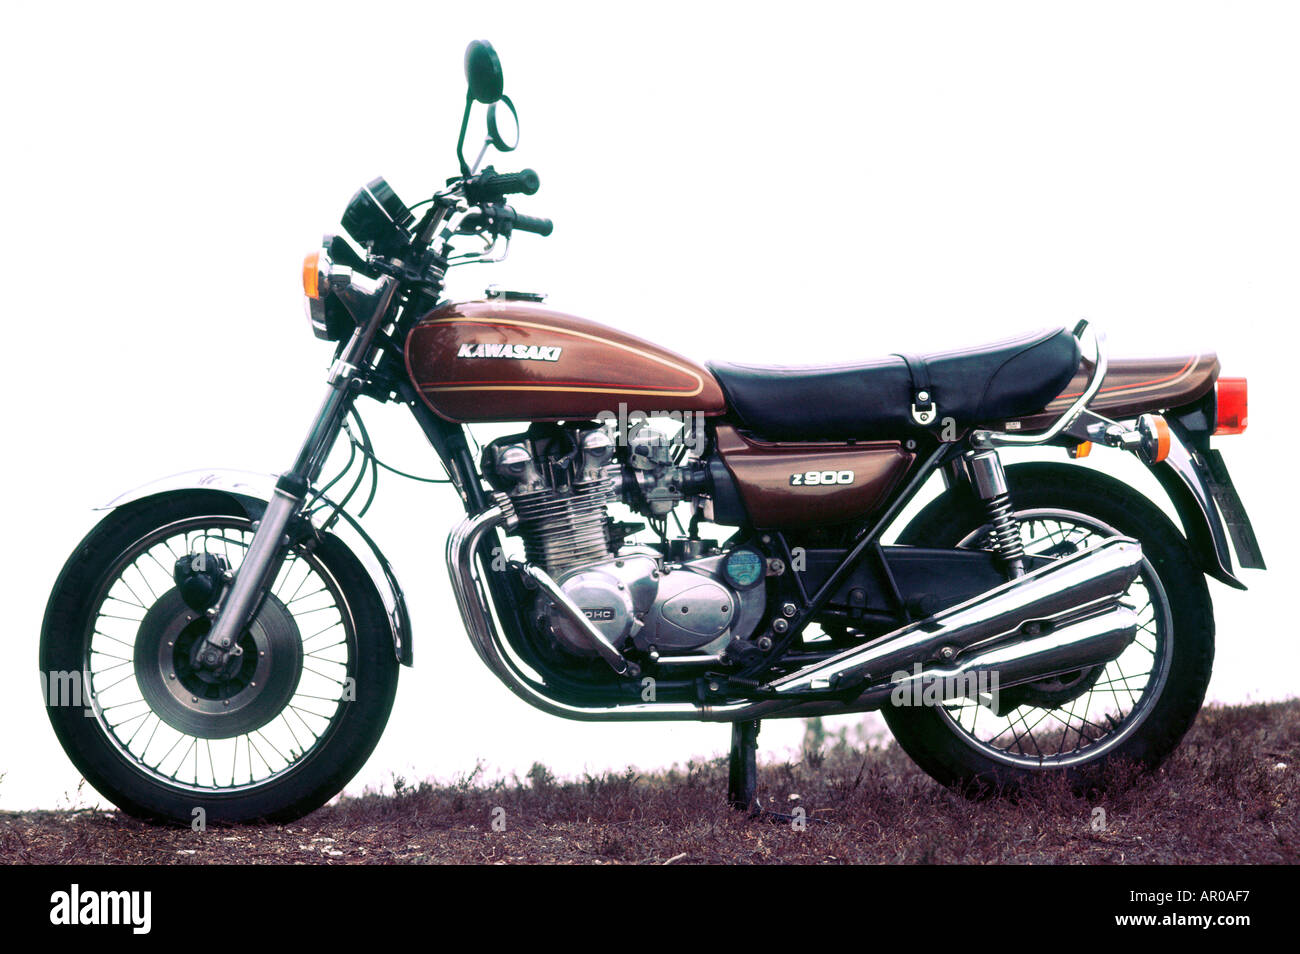 Classic Kawasaki Motorcycle High Resolution Stock Photography and Images -  Alamy